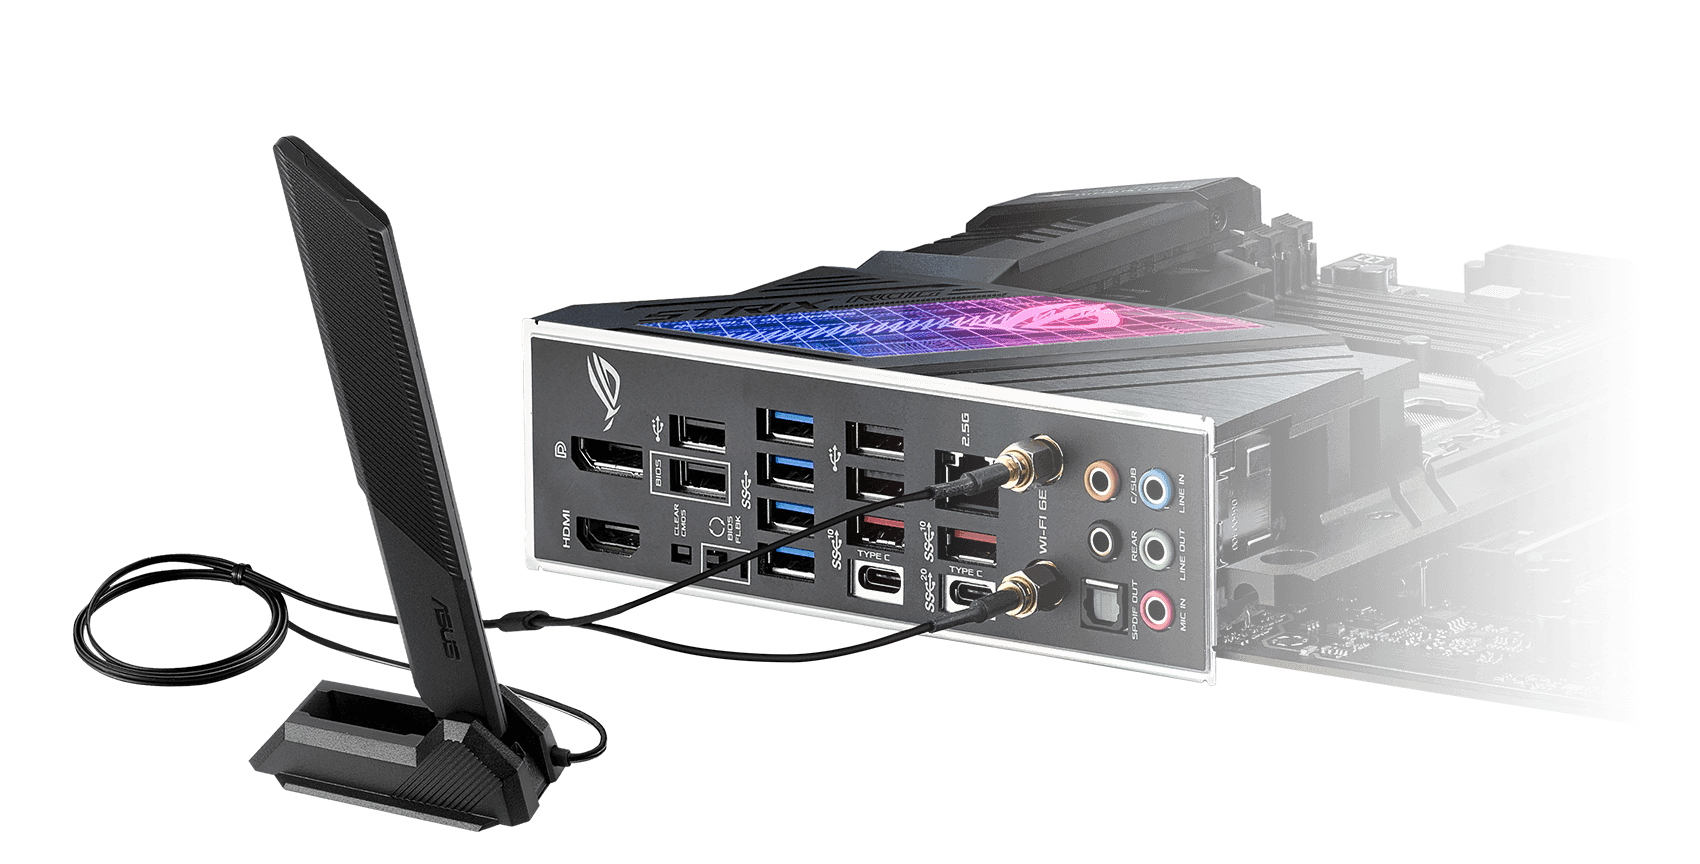 ROG Strix Z690-E Gaming WiFi features WiFi 6E, along with 2.5 Gb Ethernet